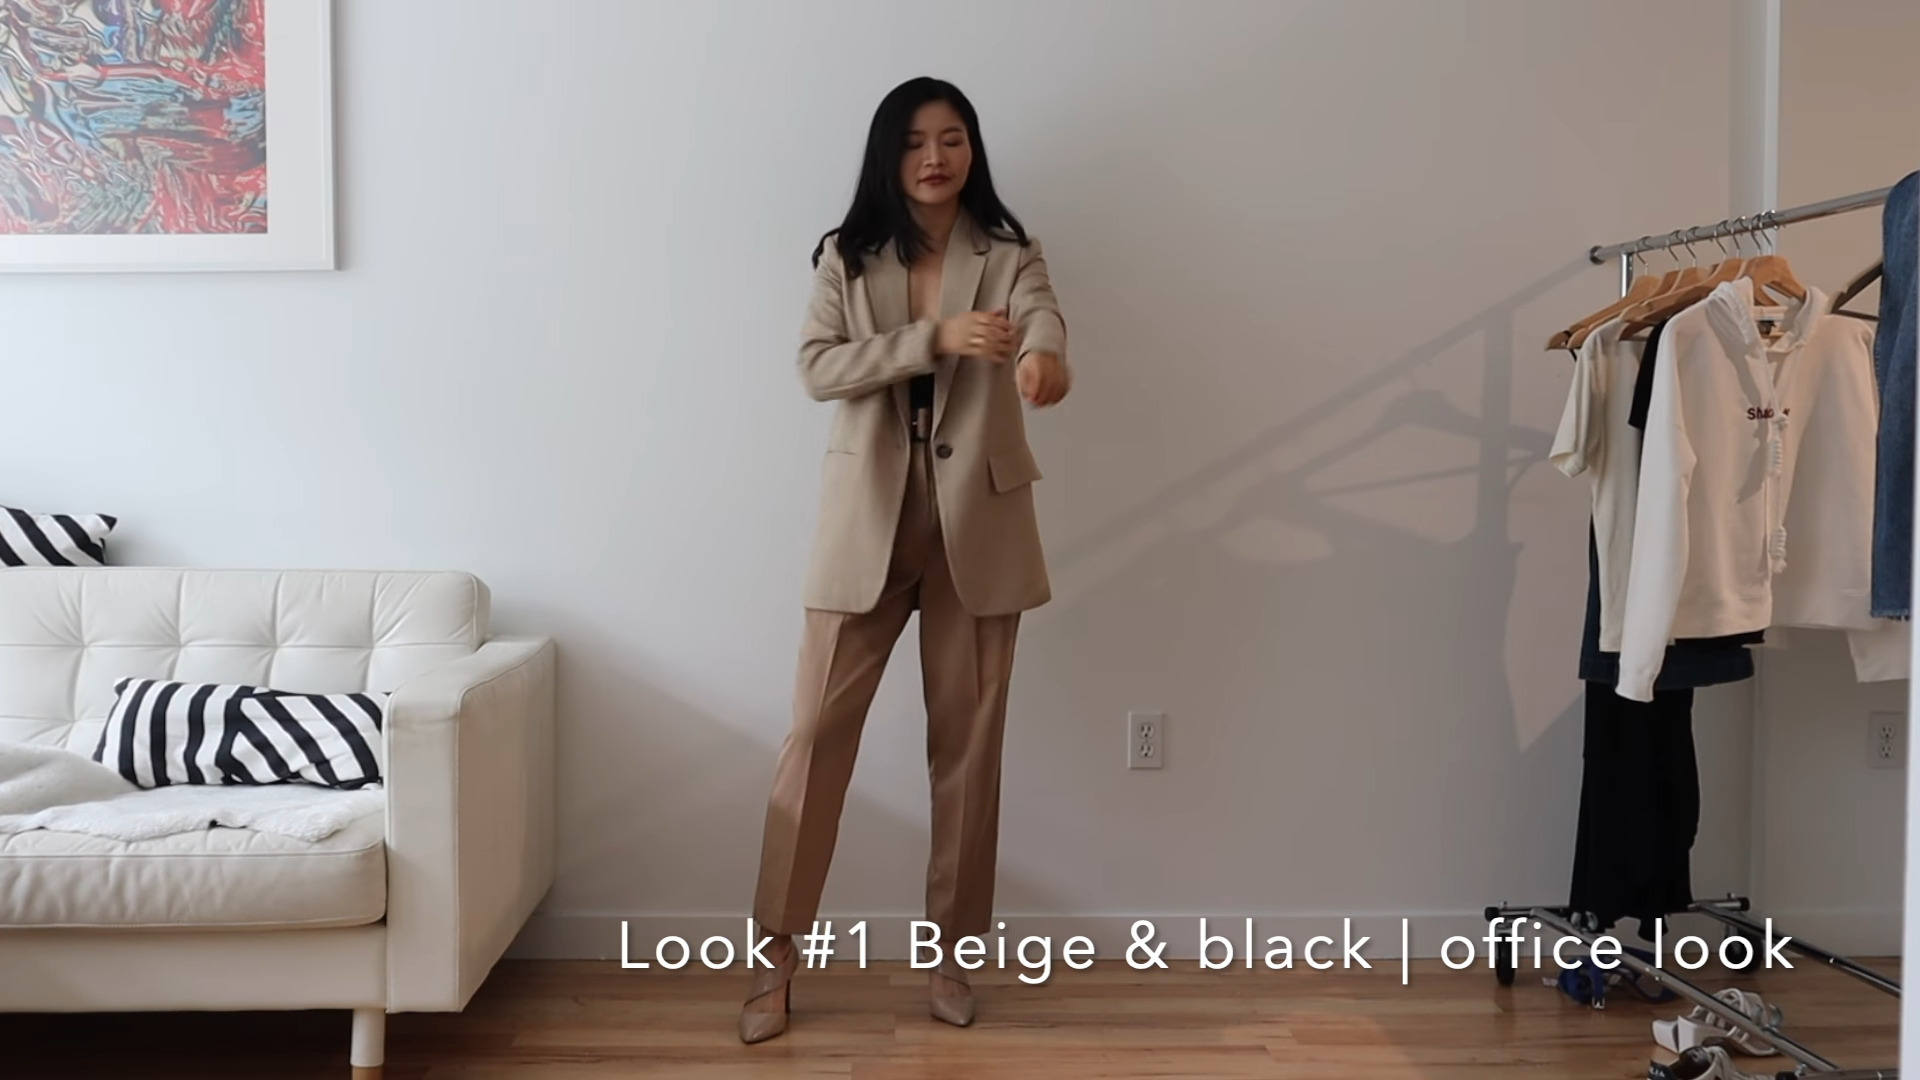  How to style the beige blazer | Fall outfit ideas | 1 blazer, 7 looks | Autumn lookbook 